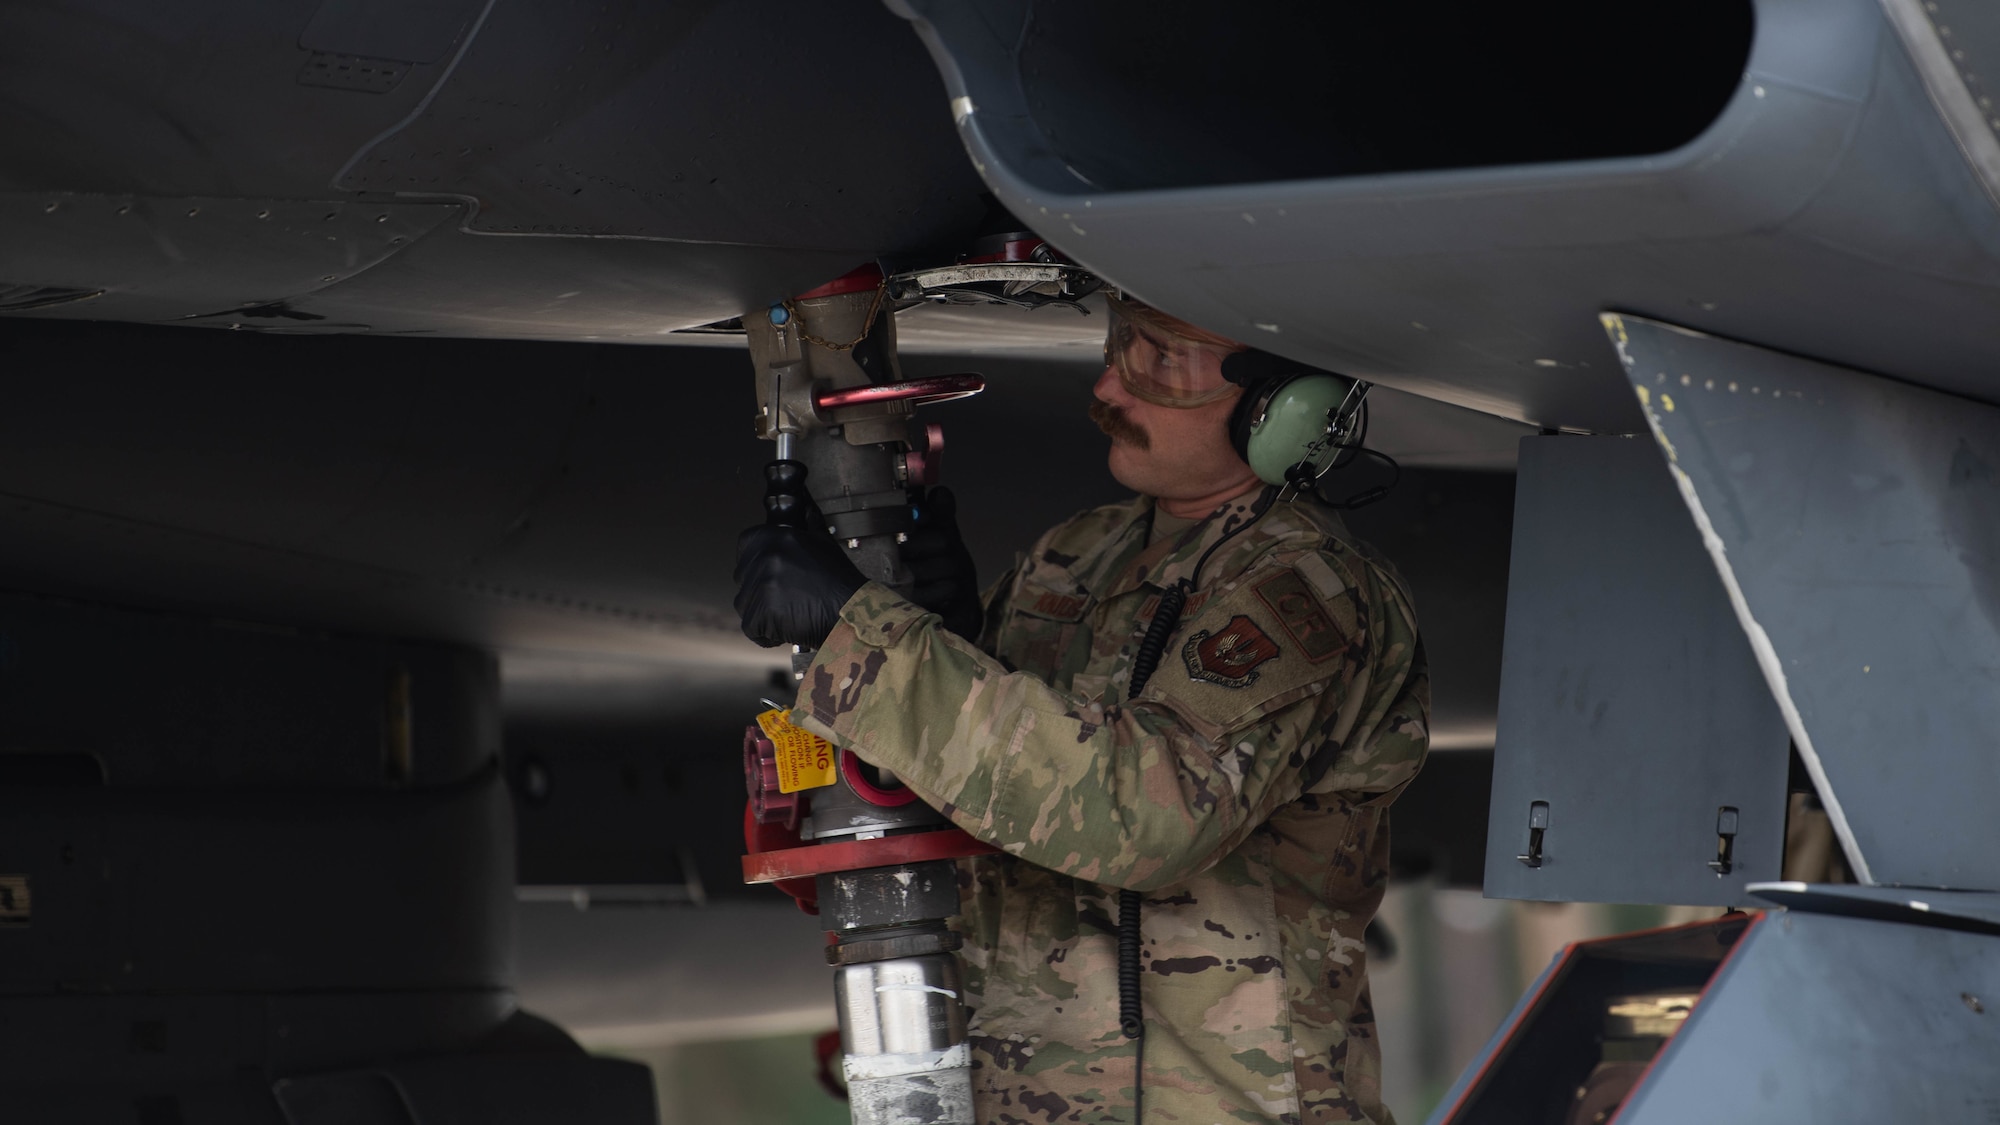 U.S. Air Force Tech. Sgt. Kyle Kudsen, 435th Contingency Response Squadron non-commissioned officer in charge of aircraft maintenance, performs a hot-pit refuel on a F-15E Strike Eagle at Royal Air Force Lakenheath, July 27, 2022. The training taking place gives the U.S. Air Force the ability to employ contingency response teams in support of combat assets in the European and African theaters. (U.S. Air Force photo by Airman Austin Salazar)